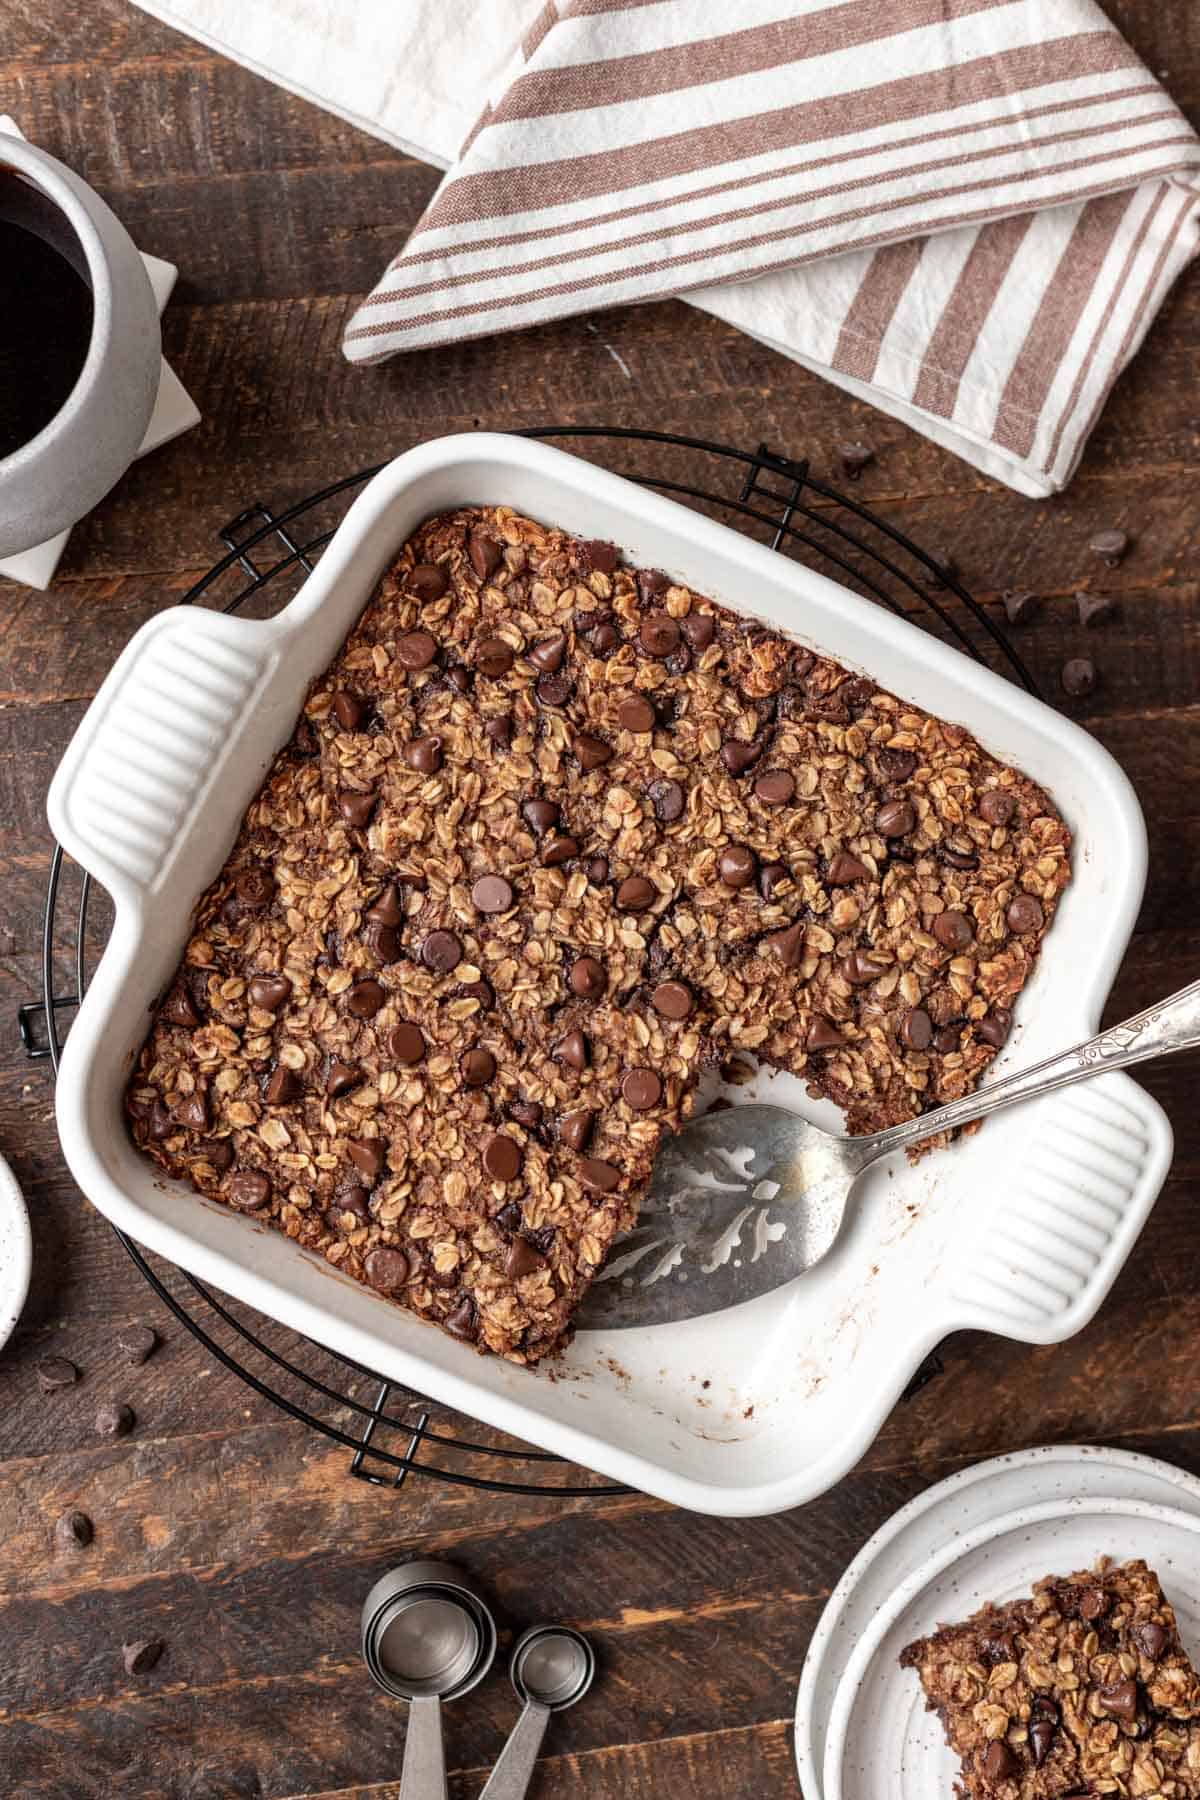 Chocolate baked oats with a slice taken out and a serving spatula.